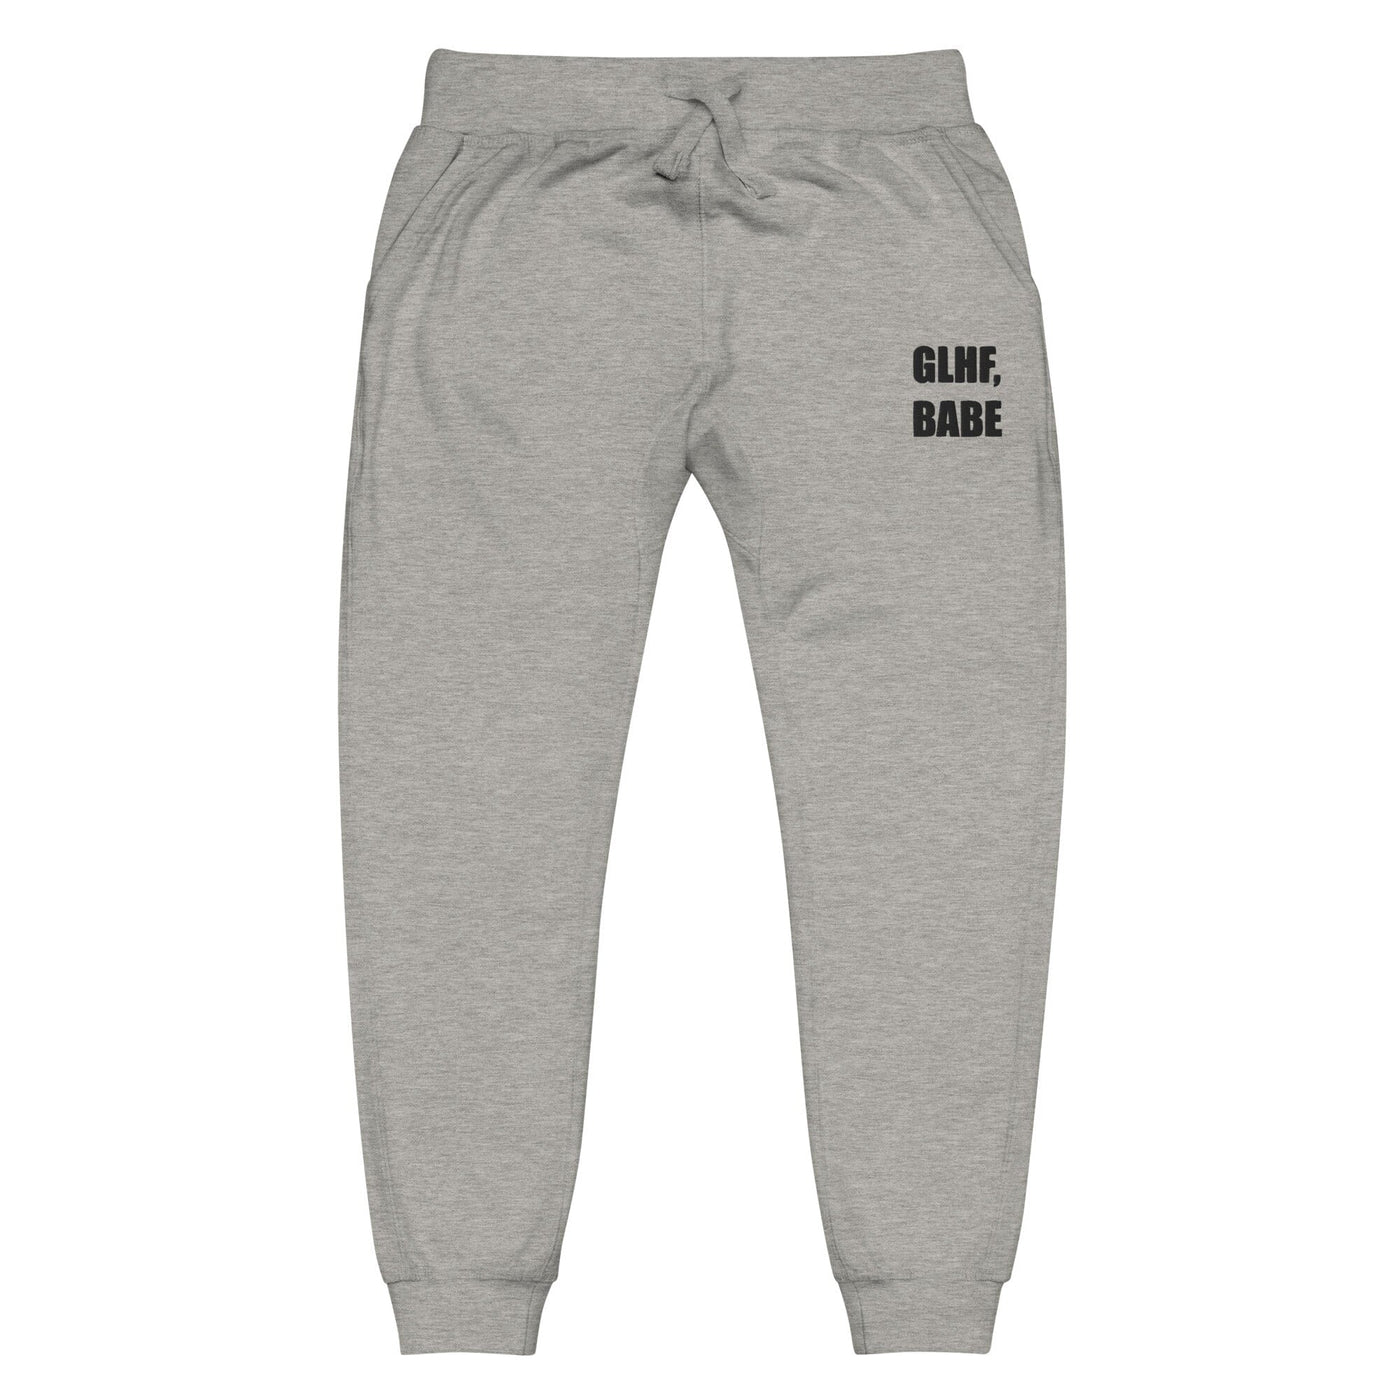 GLHF, Babe | Unisex fleece sweatpants | Gamer Affirmations Threads & Thistles Inventory Carbon Grey XS 